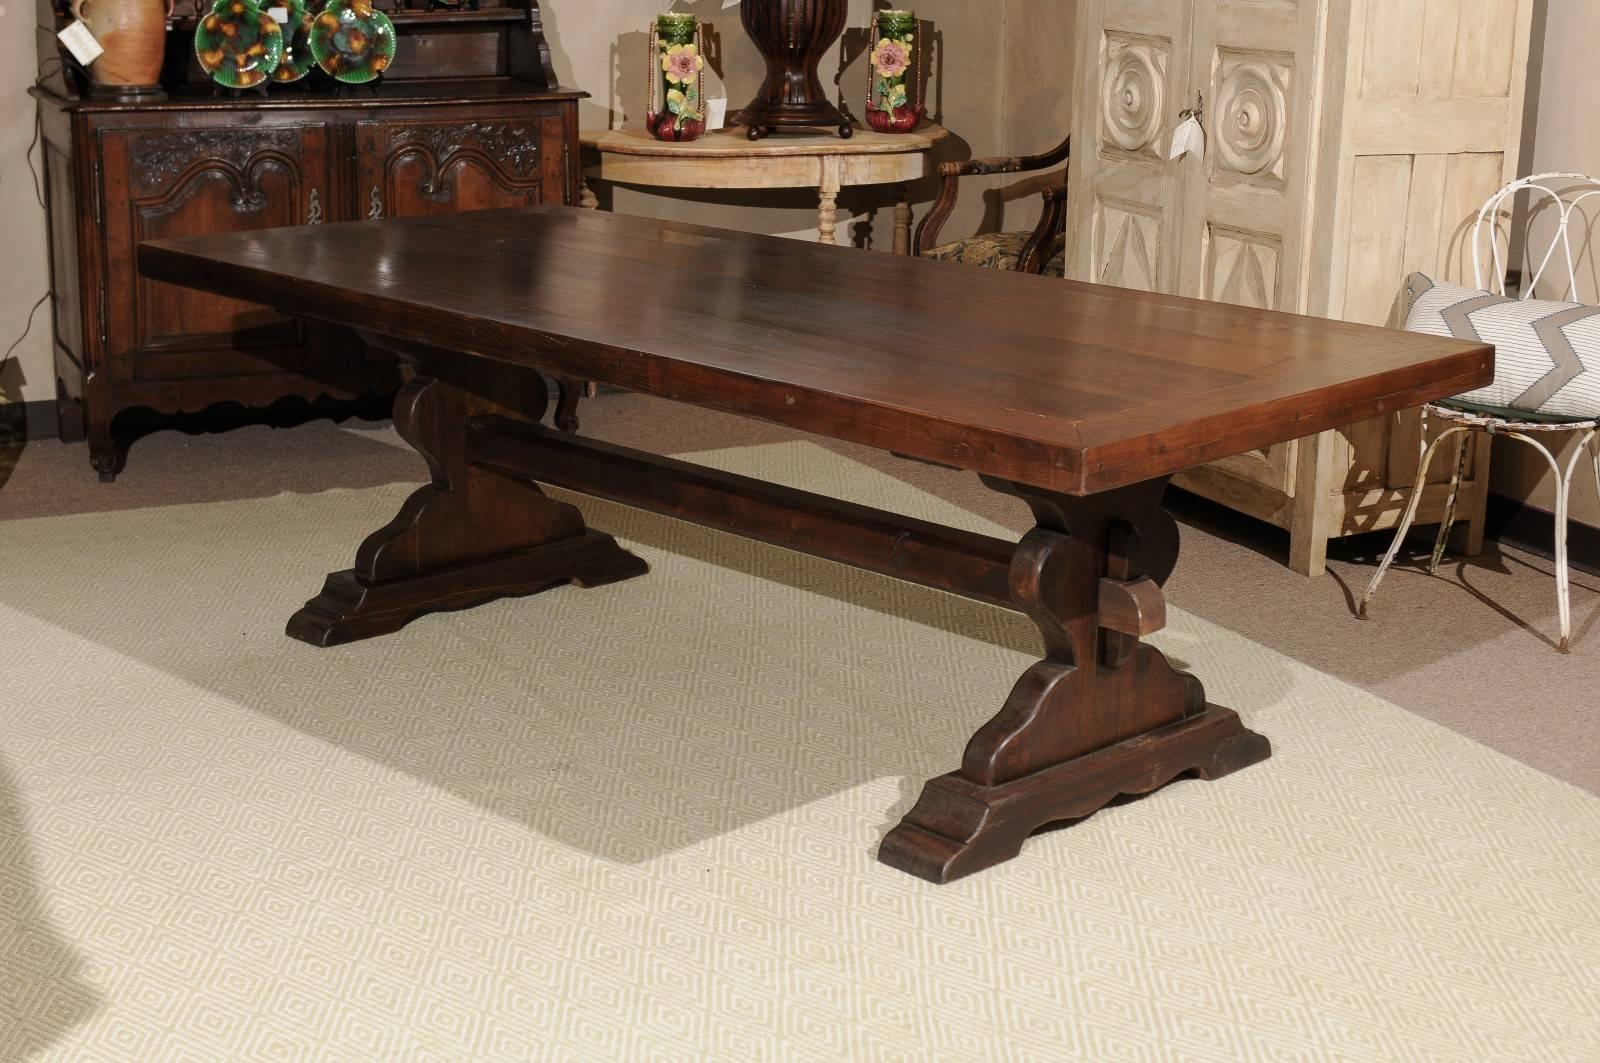 French Monastery style dining table, circa 1950
A typical monastery table is usually longer and much narrower. This version is more usable for our market at 40" wide. The thick top is a good proportion for the base and the overhang is very